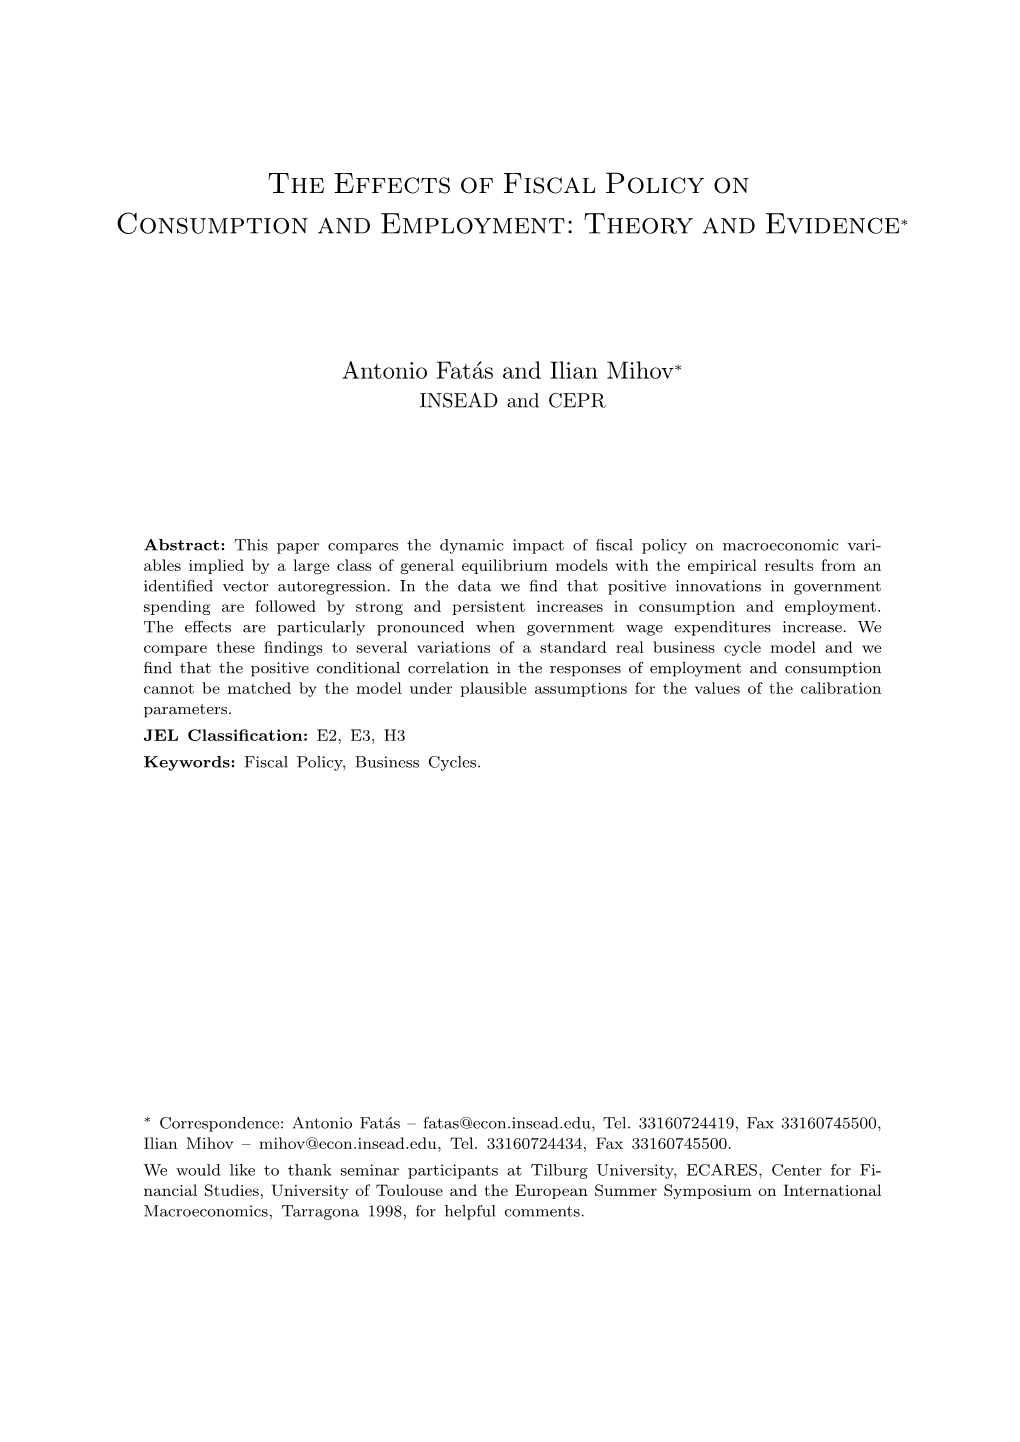 The Effects of Fiscal Policy on Consumption and Employment